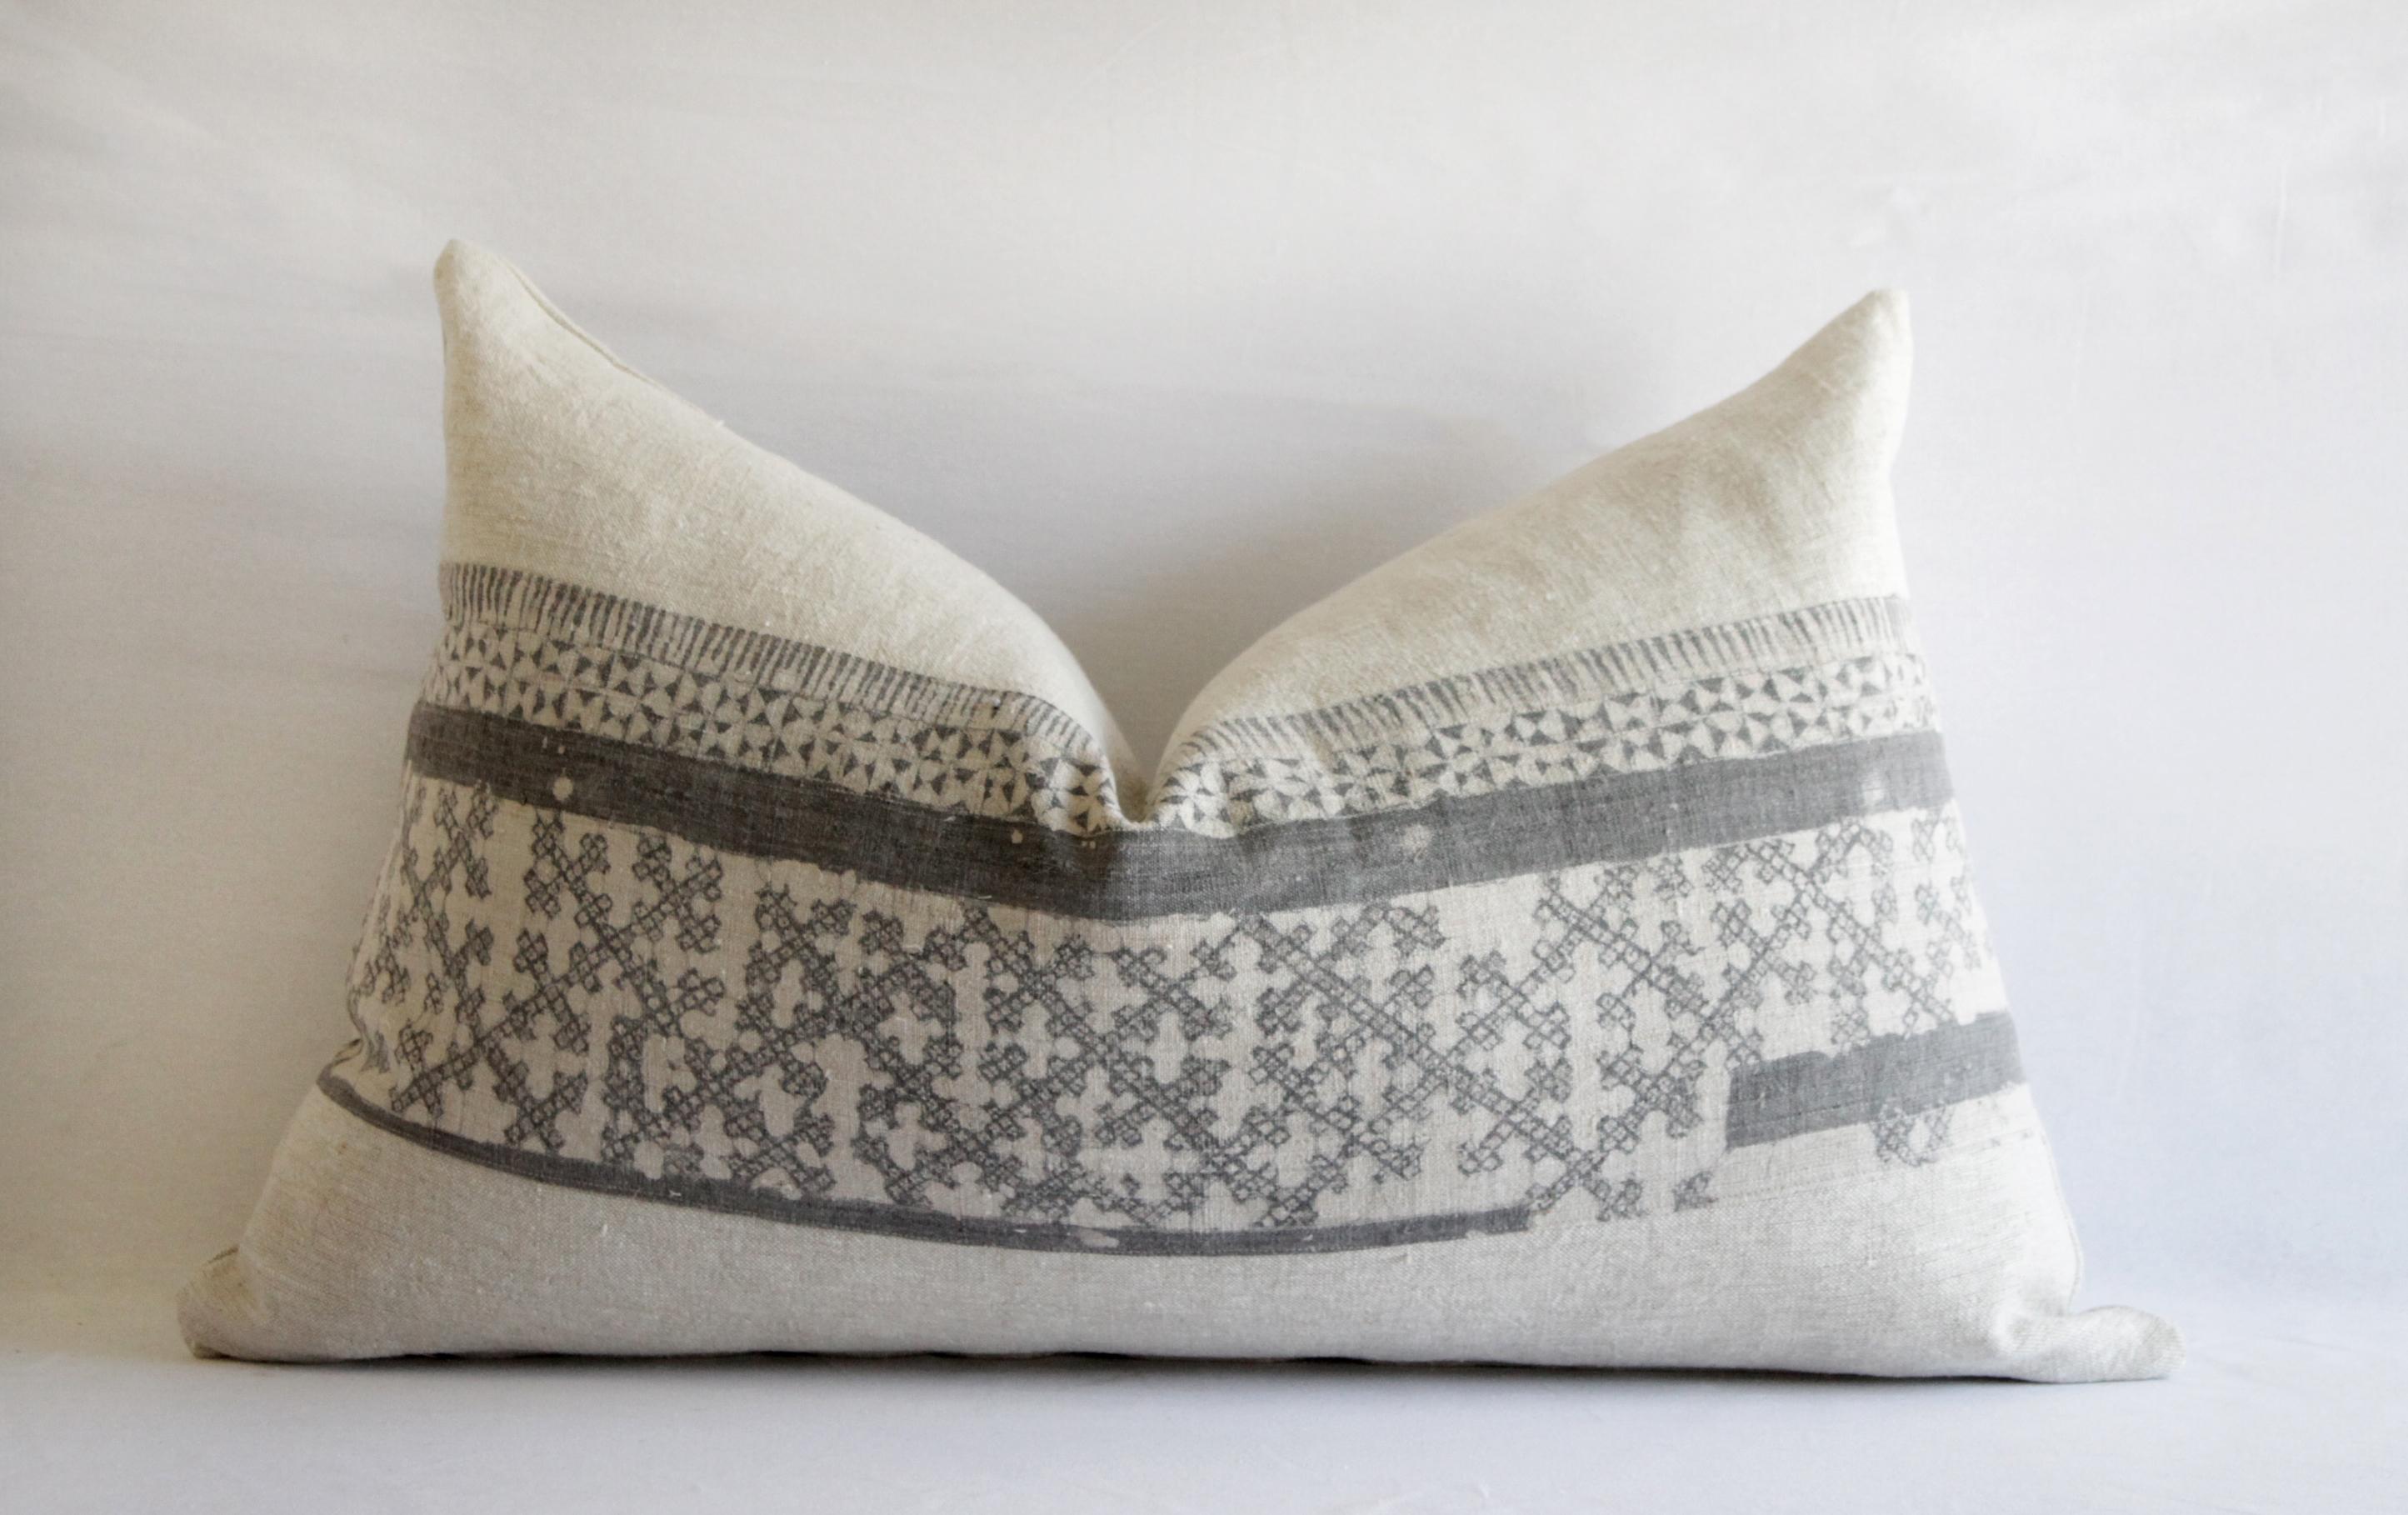 Only one left. 
Vintage batik and linen custom made pillow. The body of the pillow is 100% pure Belgian flax linen, with a vintage or antique Chinese textile center. The center band is a beautiful textured fabric in a soft grey and off white tone.